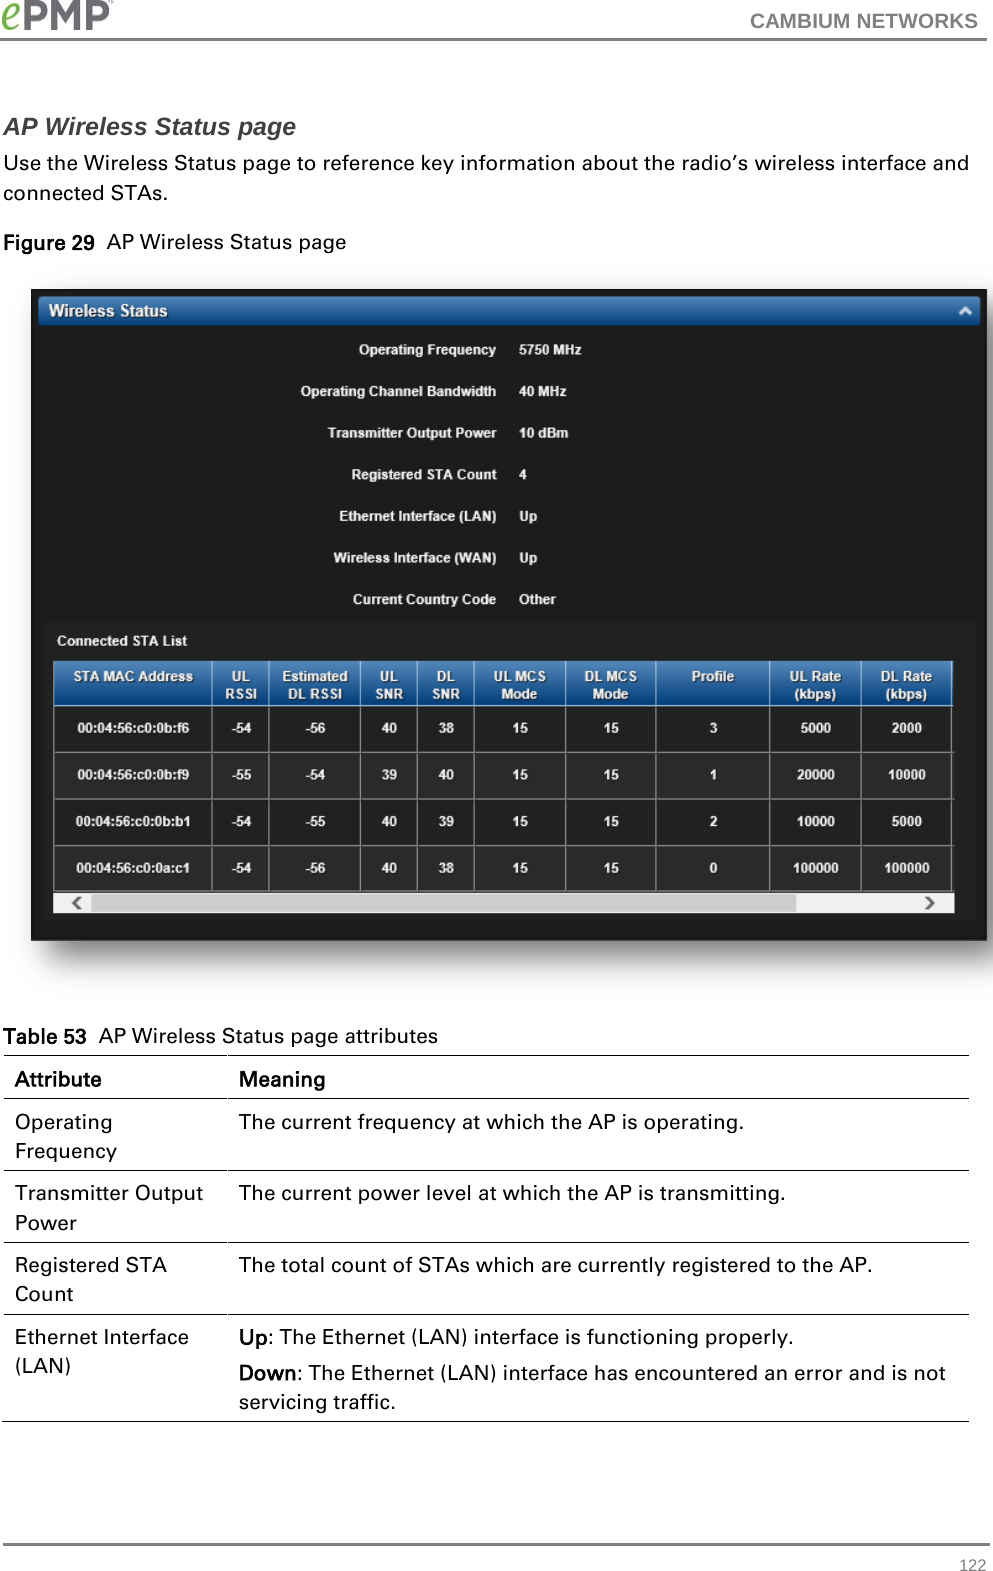 CAMBIUM NETWORKS  AP Wireless Status page Use the Wireless Status page to reference key information about the radio’s wireless interface and connected STAs. Figure 29  AP Wireless Status page  Table 53  AP Wireless Status page attributes Attribute Meaning Operating Frequency The current frequency at which the AP is operating. Transmitter Output Power The current power level at which the AP is transmitting. Registered STA Count The total count of STAs which are currently registered to the AP. Ethernet Interface (LAN) Up: The Ethernet (LAN) interface is functioning properly. Down: The Ethernet (LAN) interface has encountered an error and is not servicing traffic.  122 